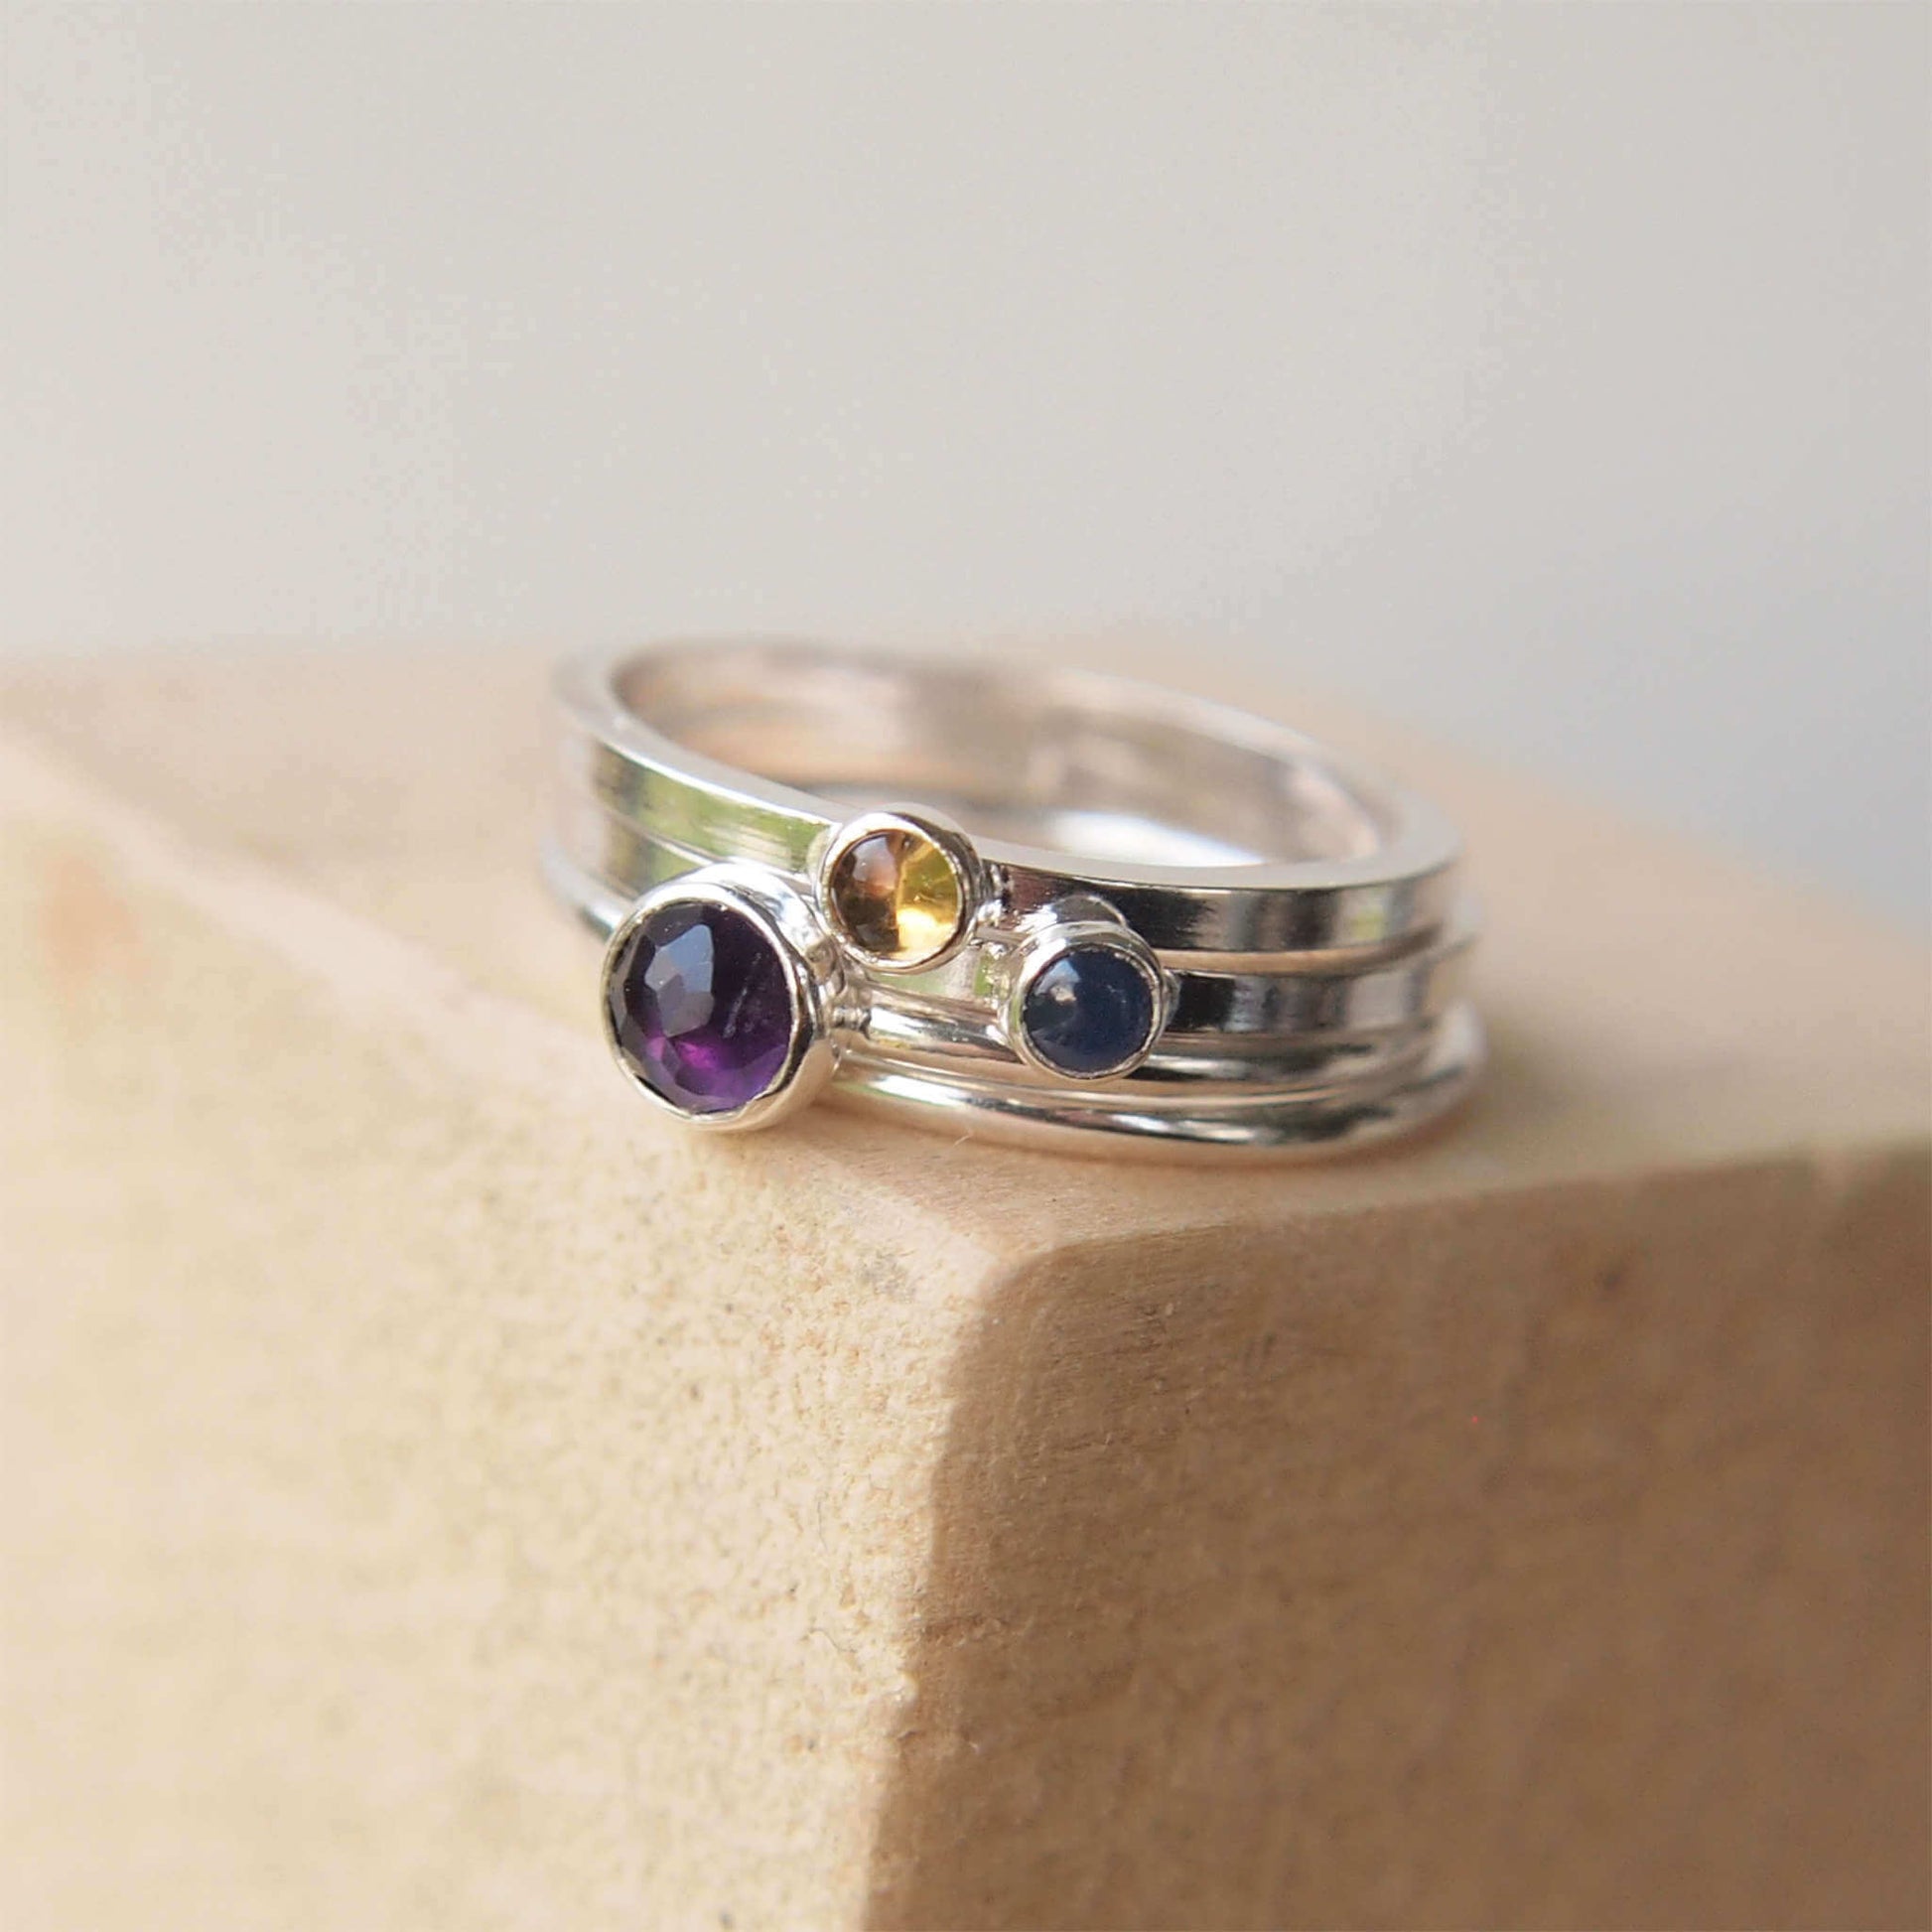 Ring set featuring three birthstones in purple, yellow and Blue. The stones used are Amethyst for February, Citrine for November, September for Sapphire. The rings are made from sterling silver in a selection of band styles and different sized stones. Handmade in Scotland by maram jewellery